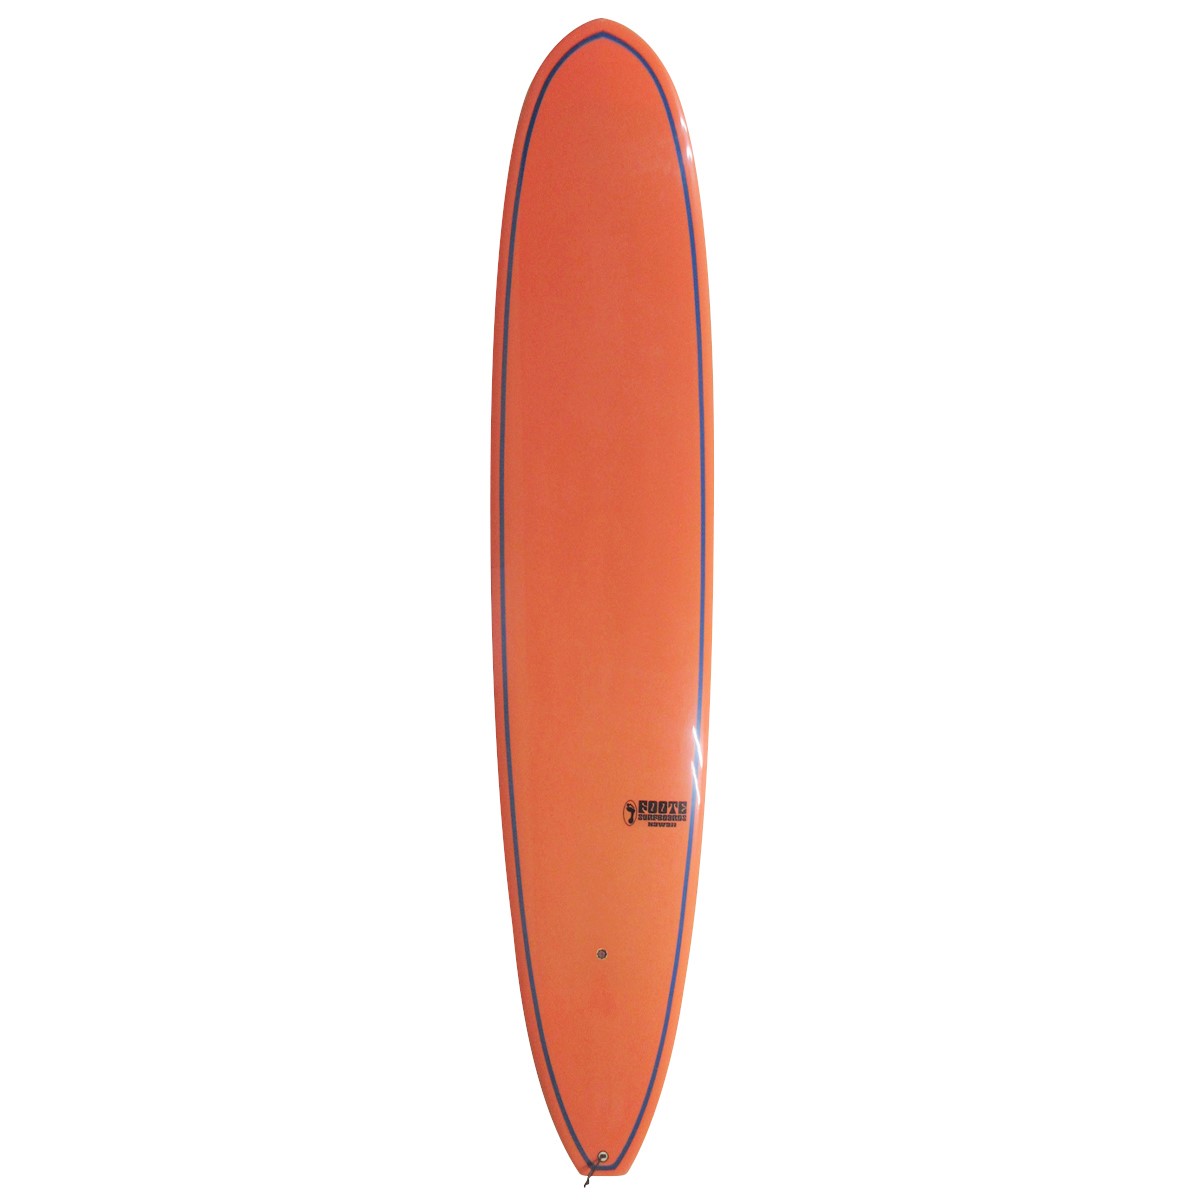  / FOOTE SURFBOARDS HAWAII / ALL ROUND 9`4